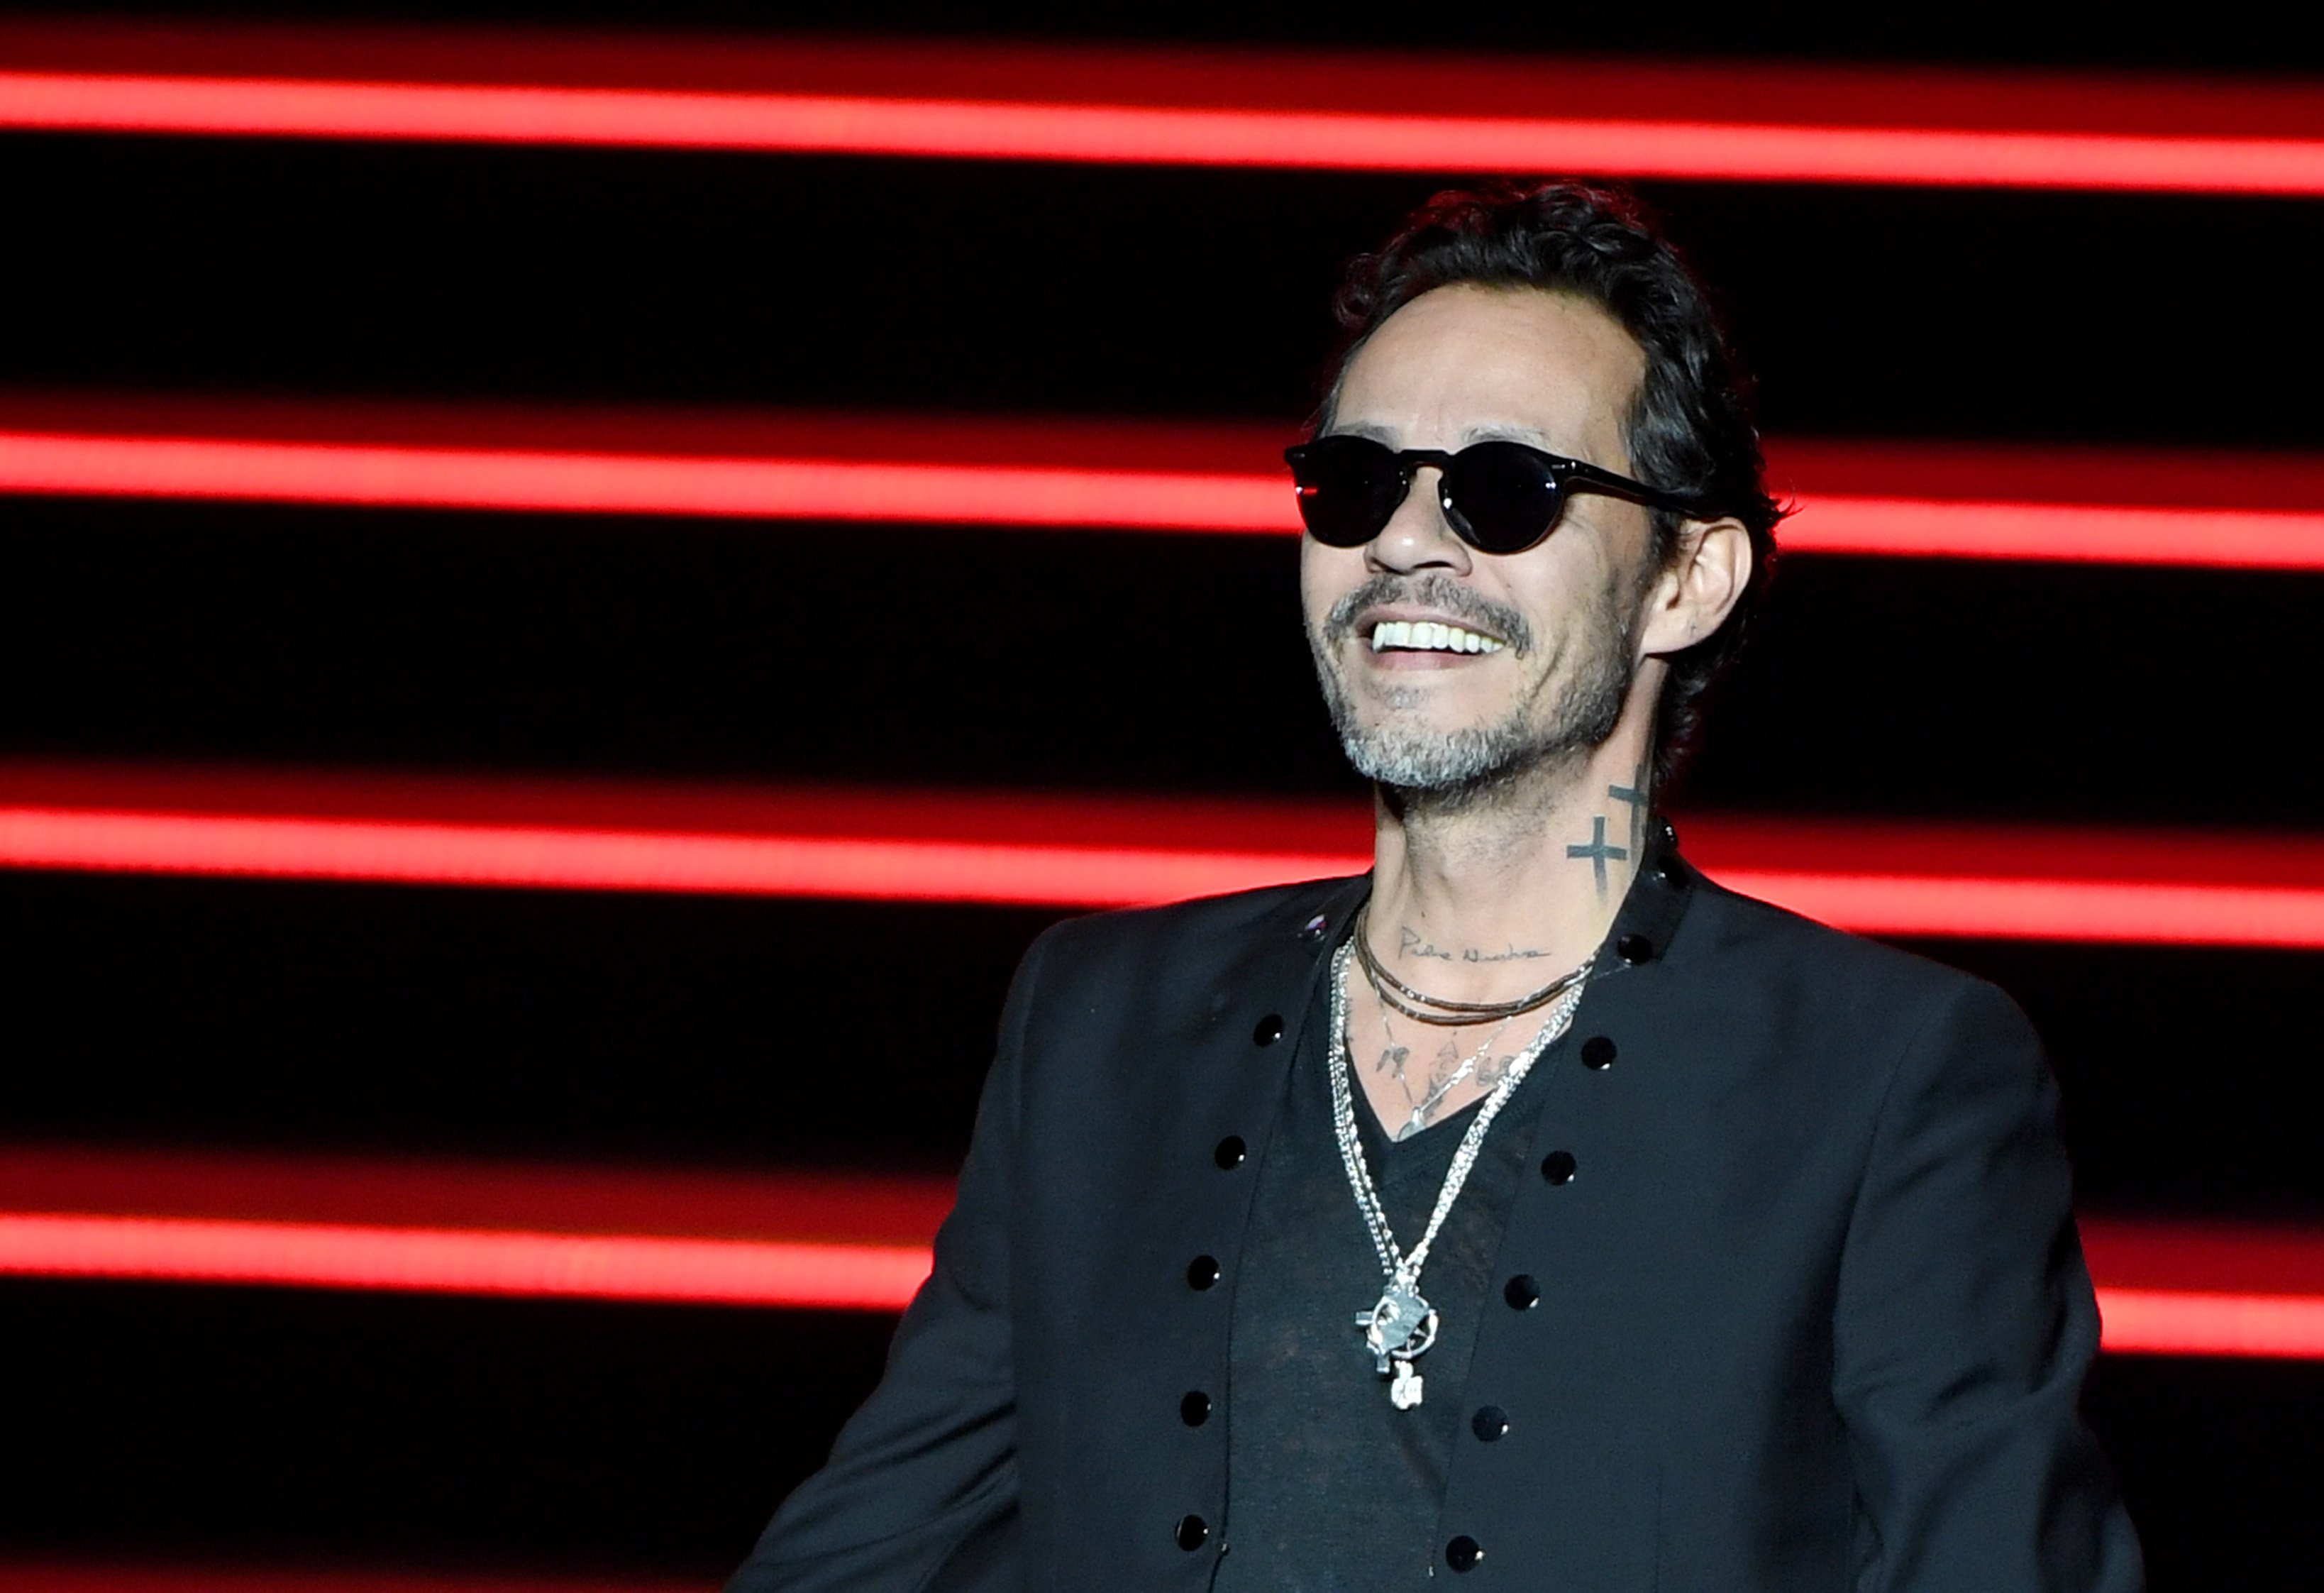 Marc Anthony performing during his Opus tour on September 15, 2019, in Las Vegas. | Source: Getty Images